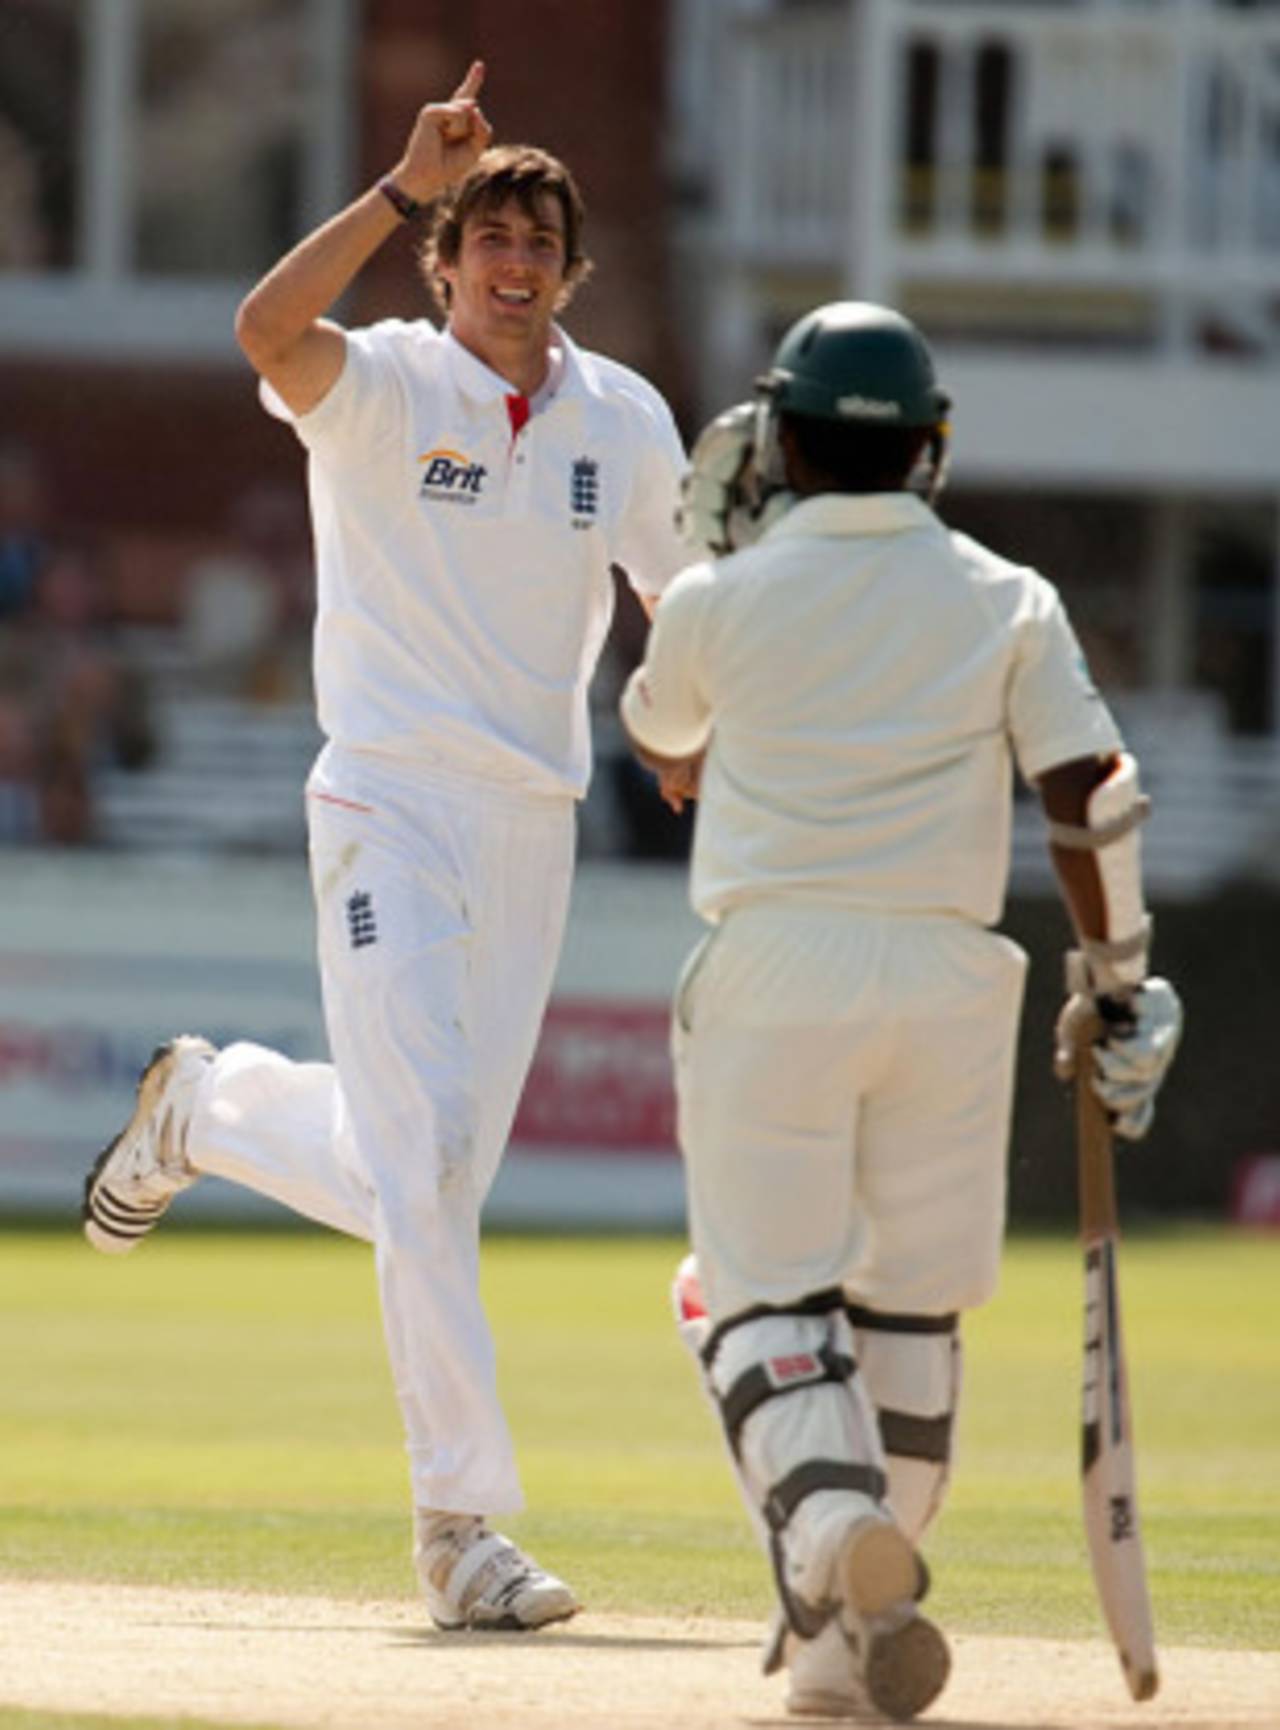 Steven Finn claimed his second wicket when Imrul Kayes was taken at short leg, England v Bangladesh, 1st Test, Lord's, May 30, 2010 
